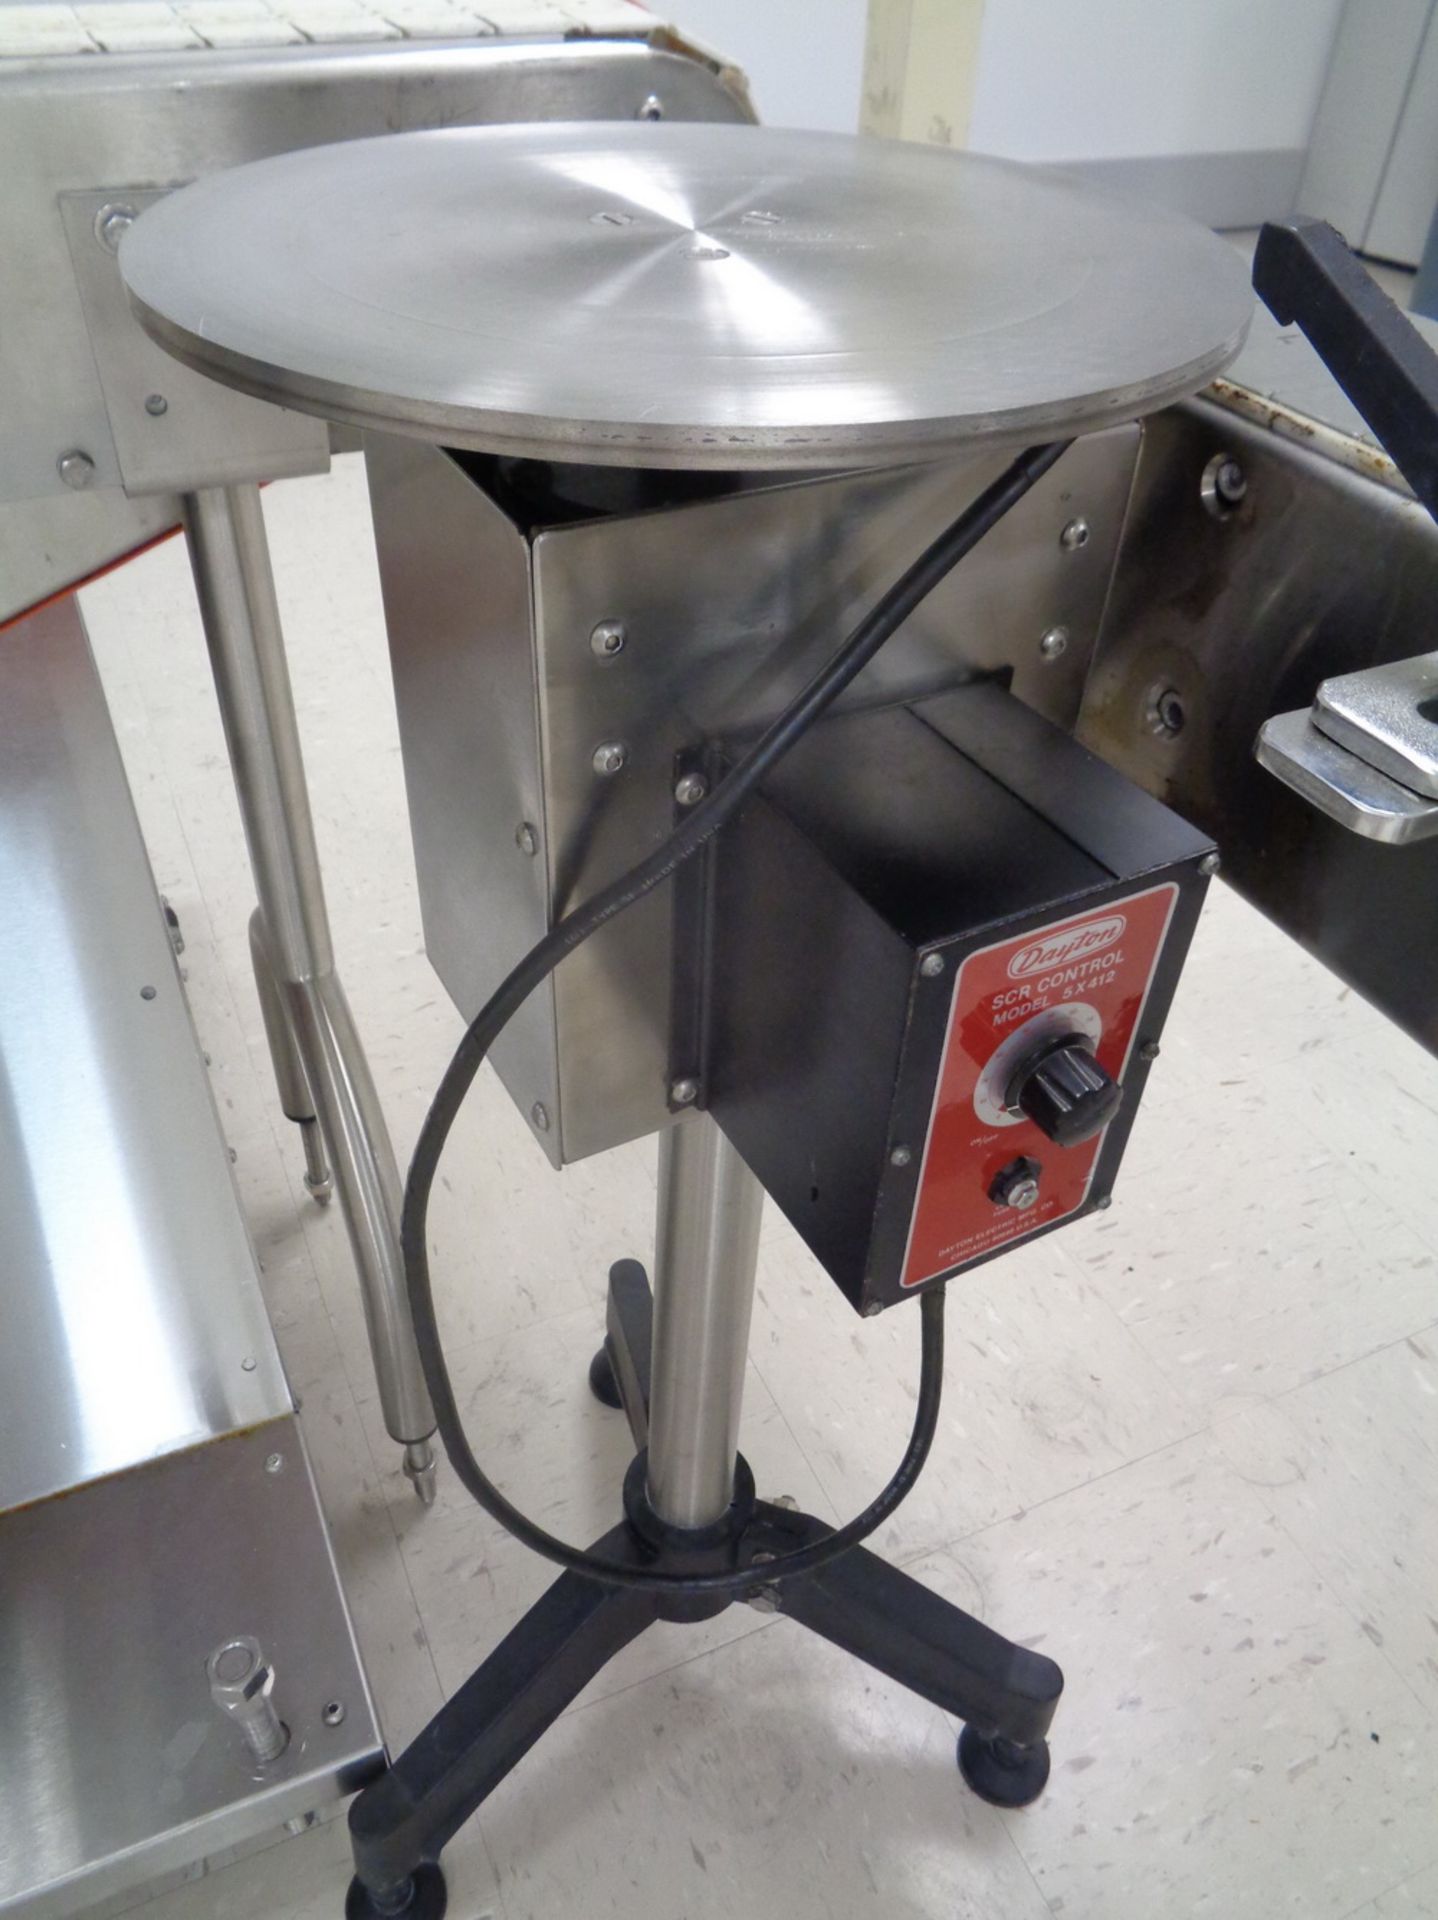 12” DIAMETER TRANSFER DISK (FOR 90 DEGREE DIRECTION CHANGE) SEE AUCTIONEER NOTE: